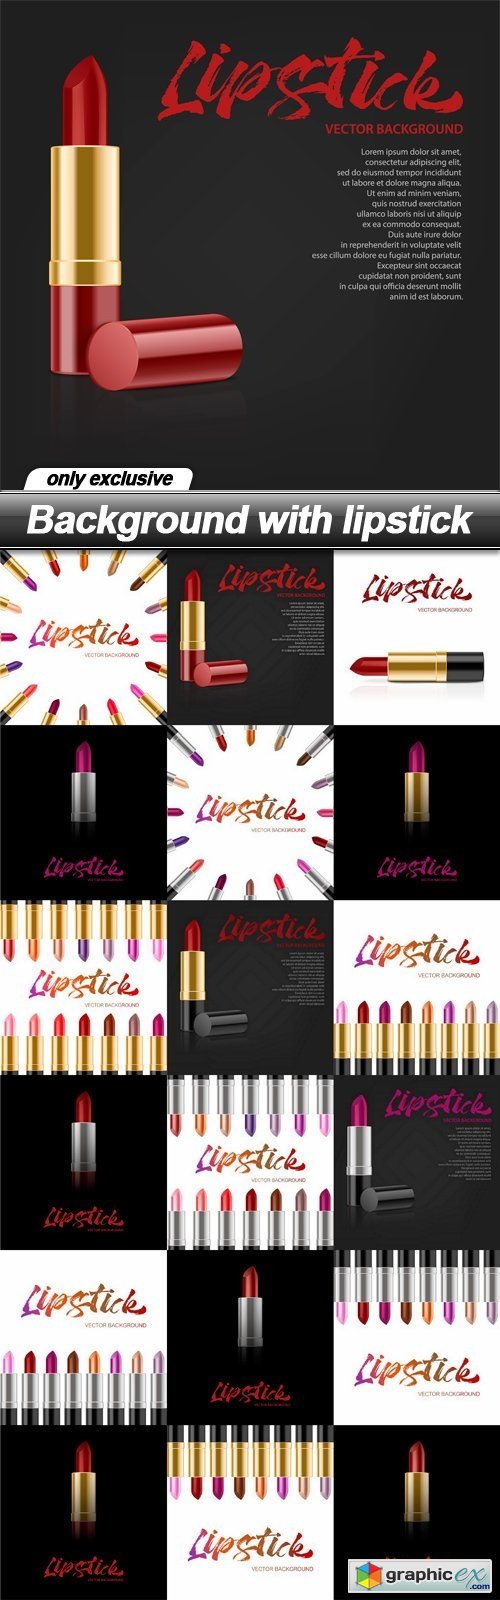 Background with lipstick - 18 EPS